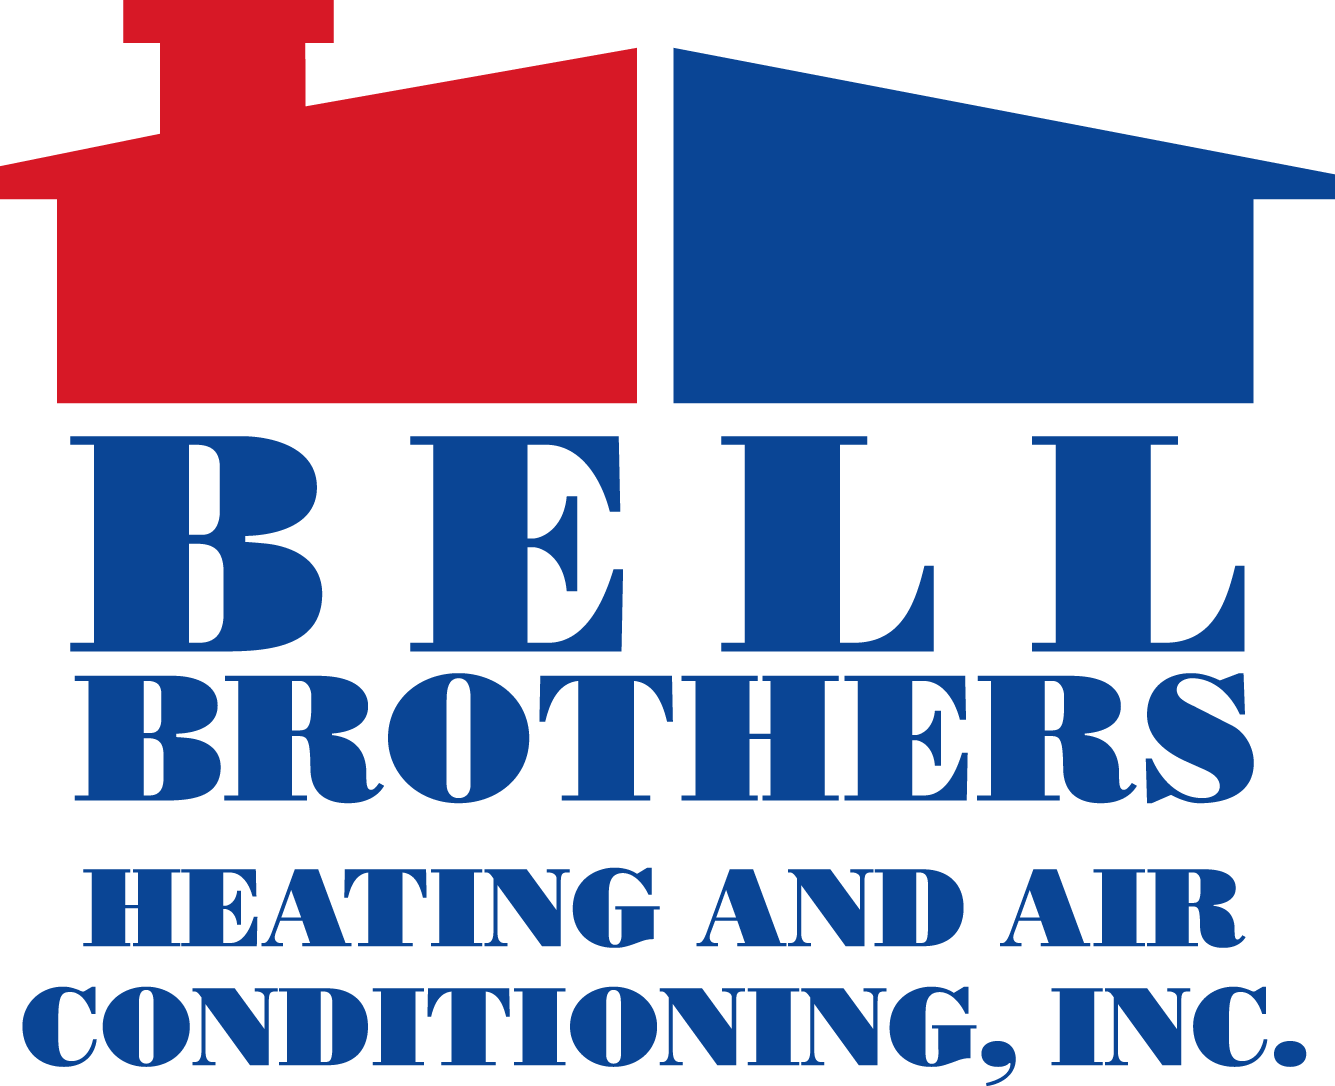 Hvac Des Moines, Ia Bell Brothers Heating And Air Conditioning, - Bell Brothers Des Moines Ia (1335x1086)